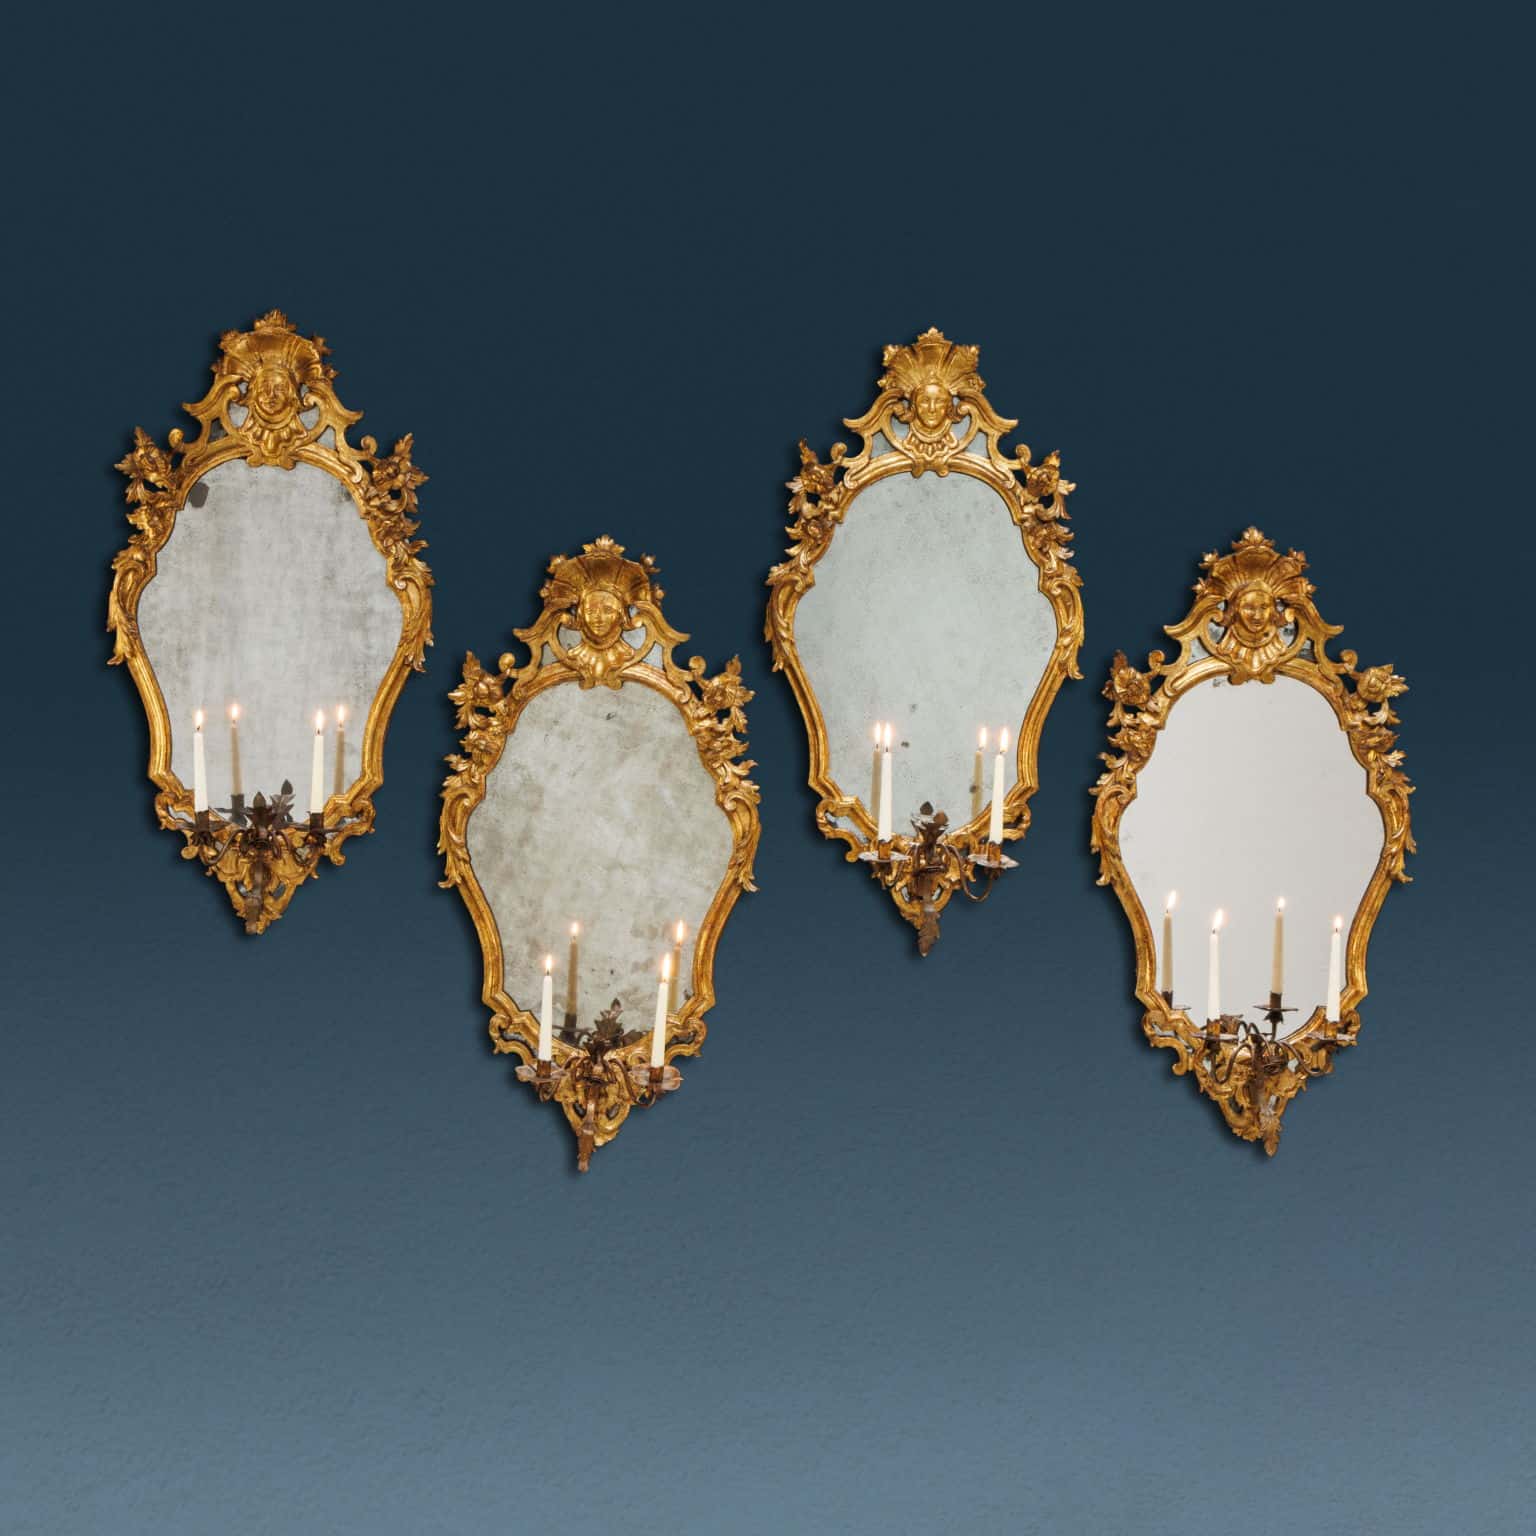 Group of four mirrors. Tuscany, first quarter of the 18th century